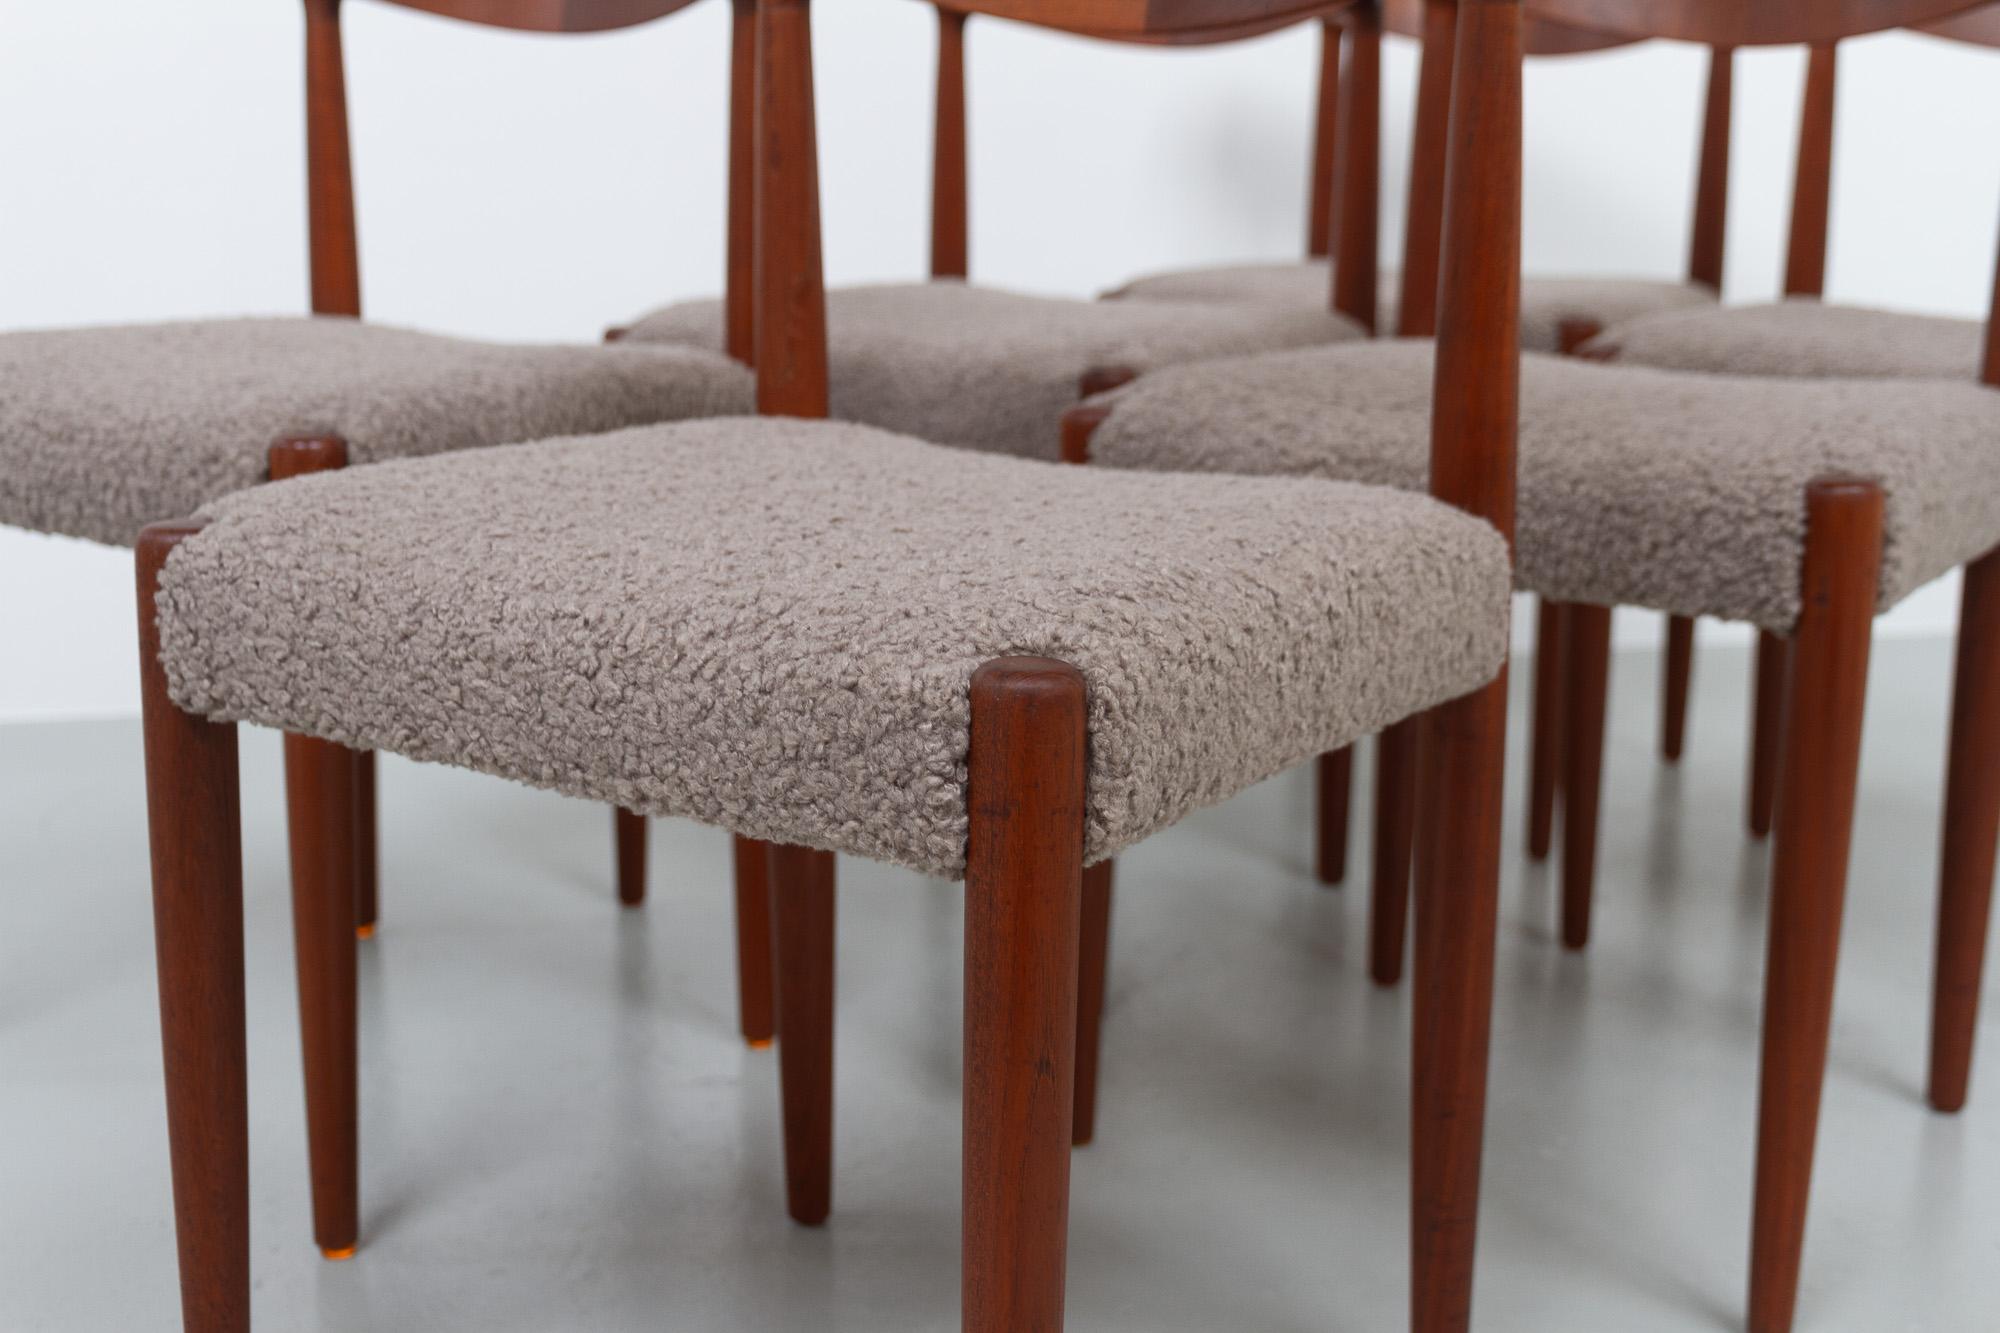 Danish Modern Teak Dining Chairs by Knud Færch for Slagelse, 1960s. Set of 6. For Sale 1